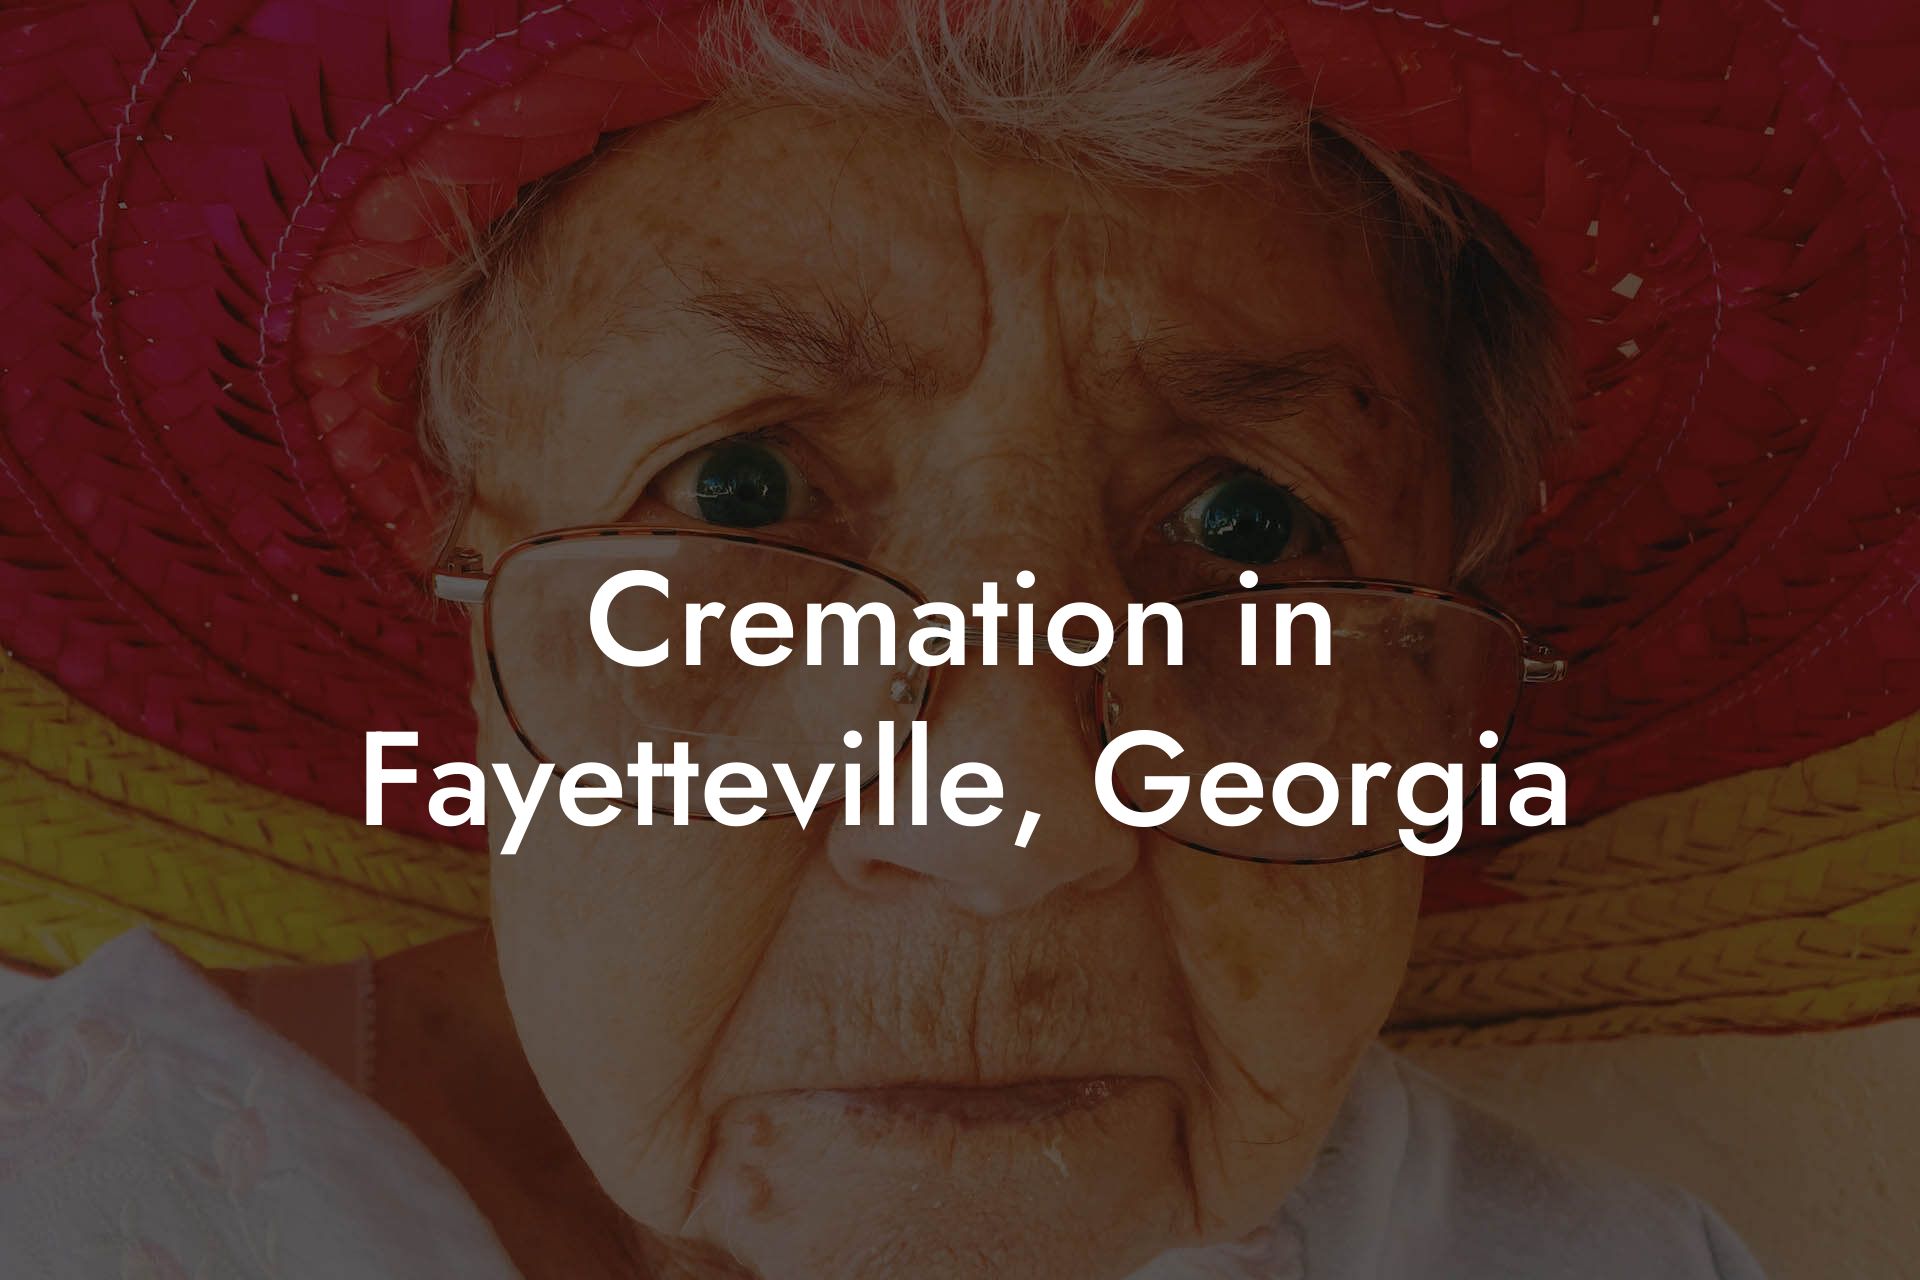 Cremation in Fayetteville, Georgia